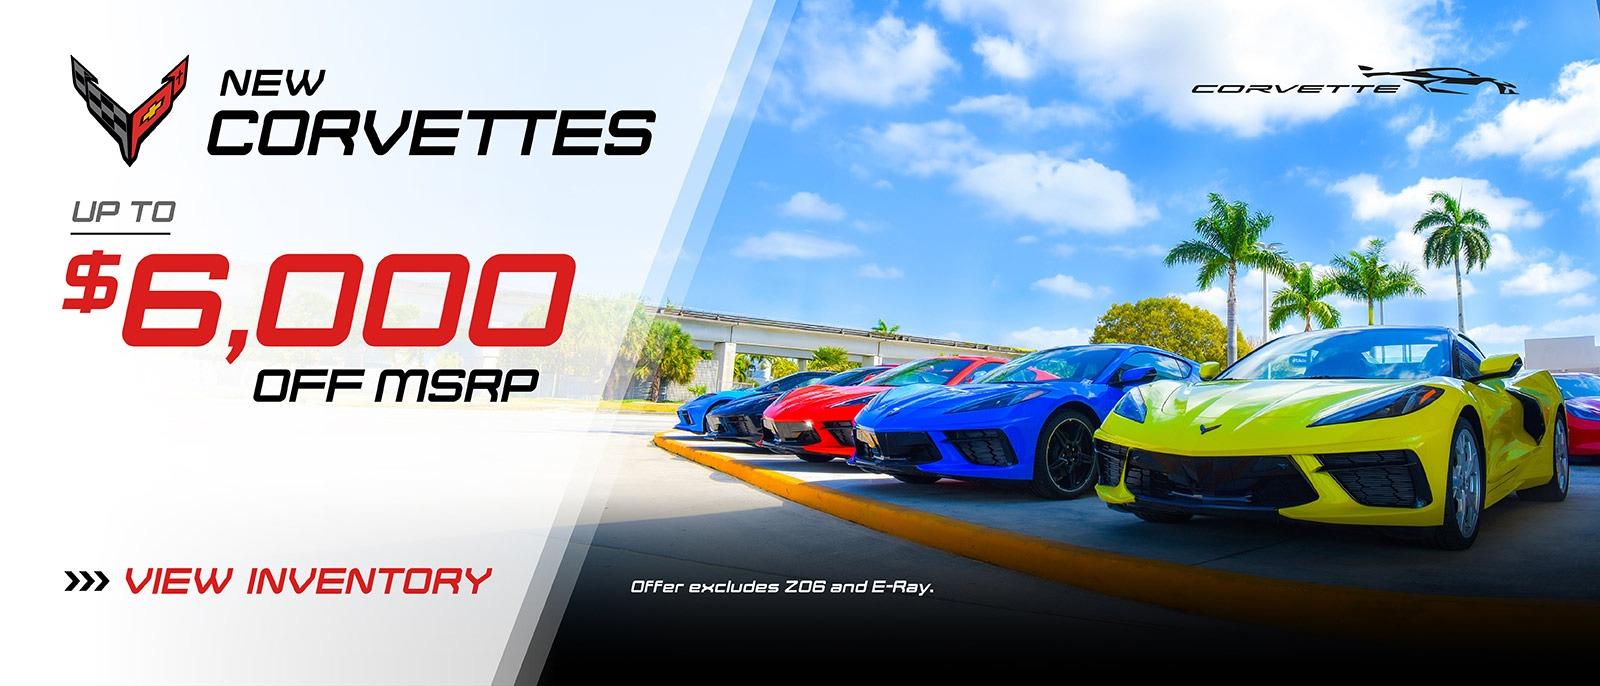 New Corvettes Up to $6000 off MSRP